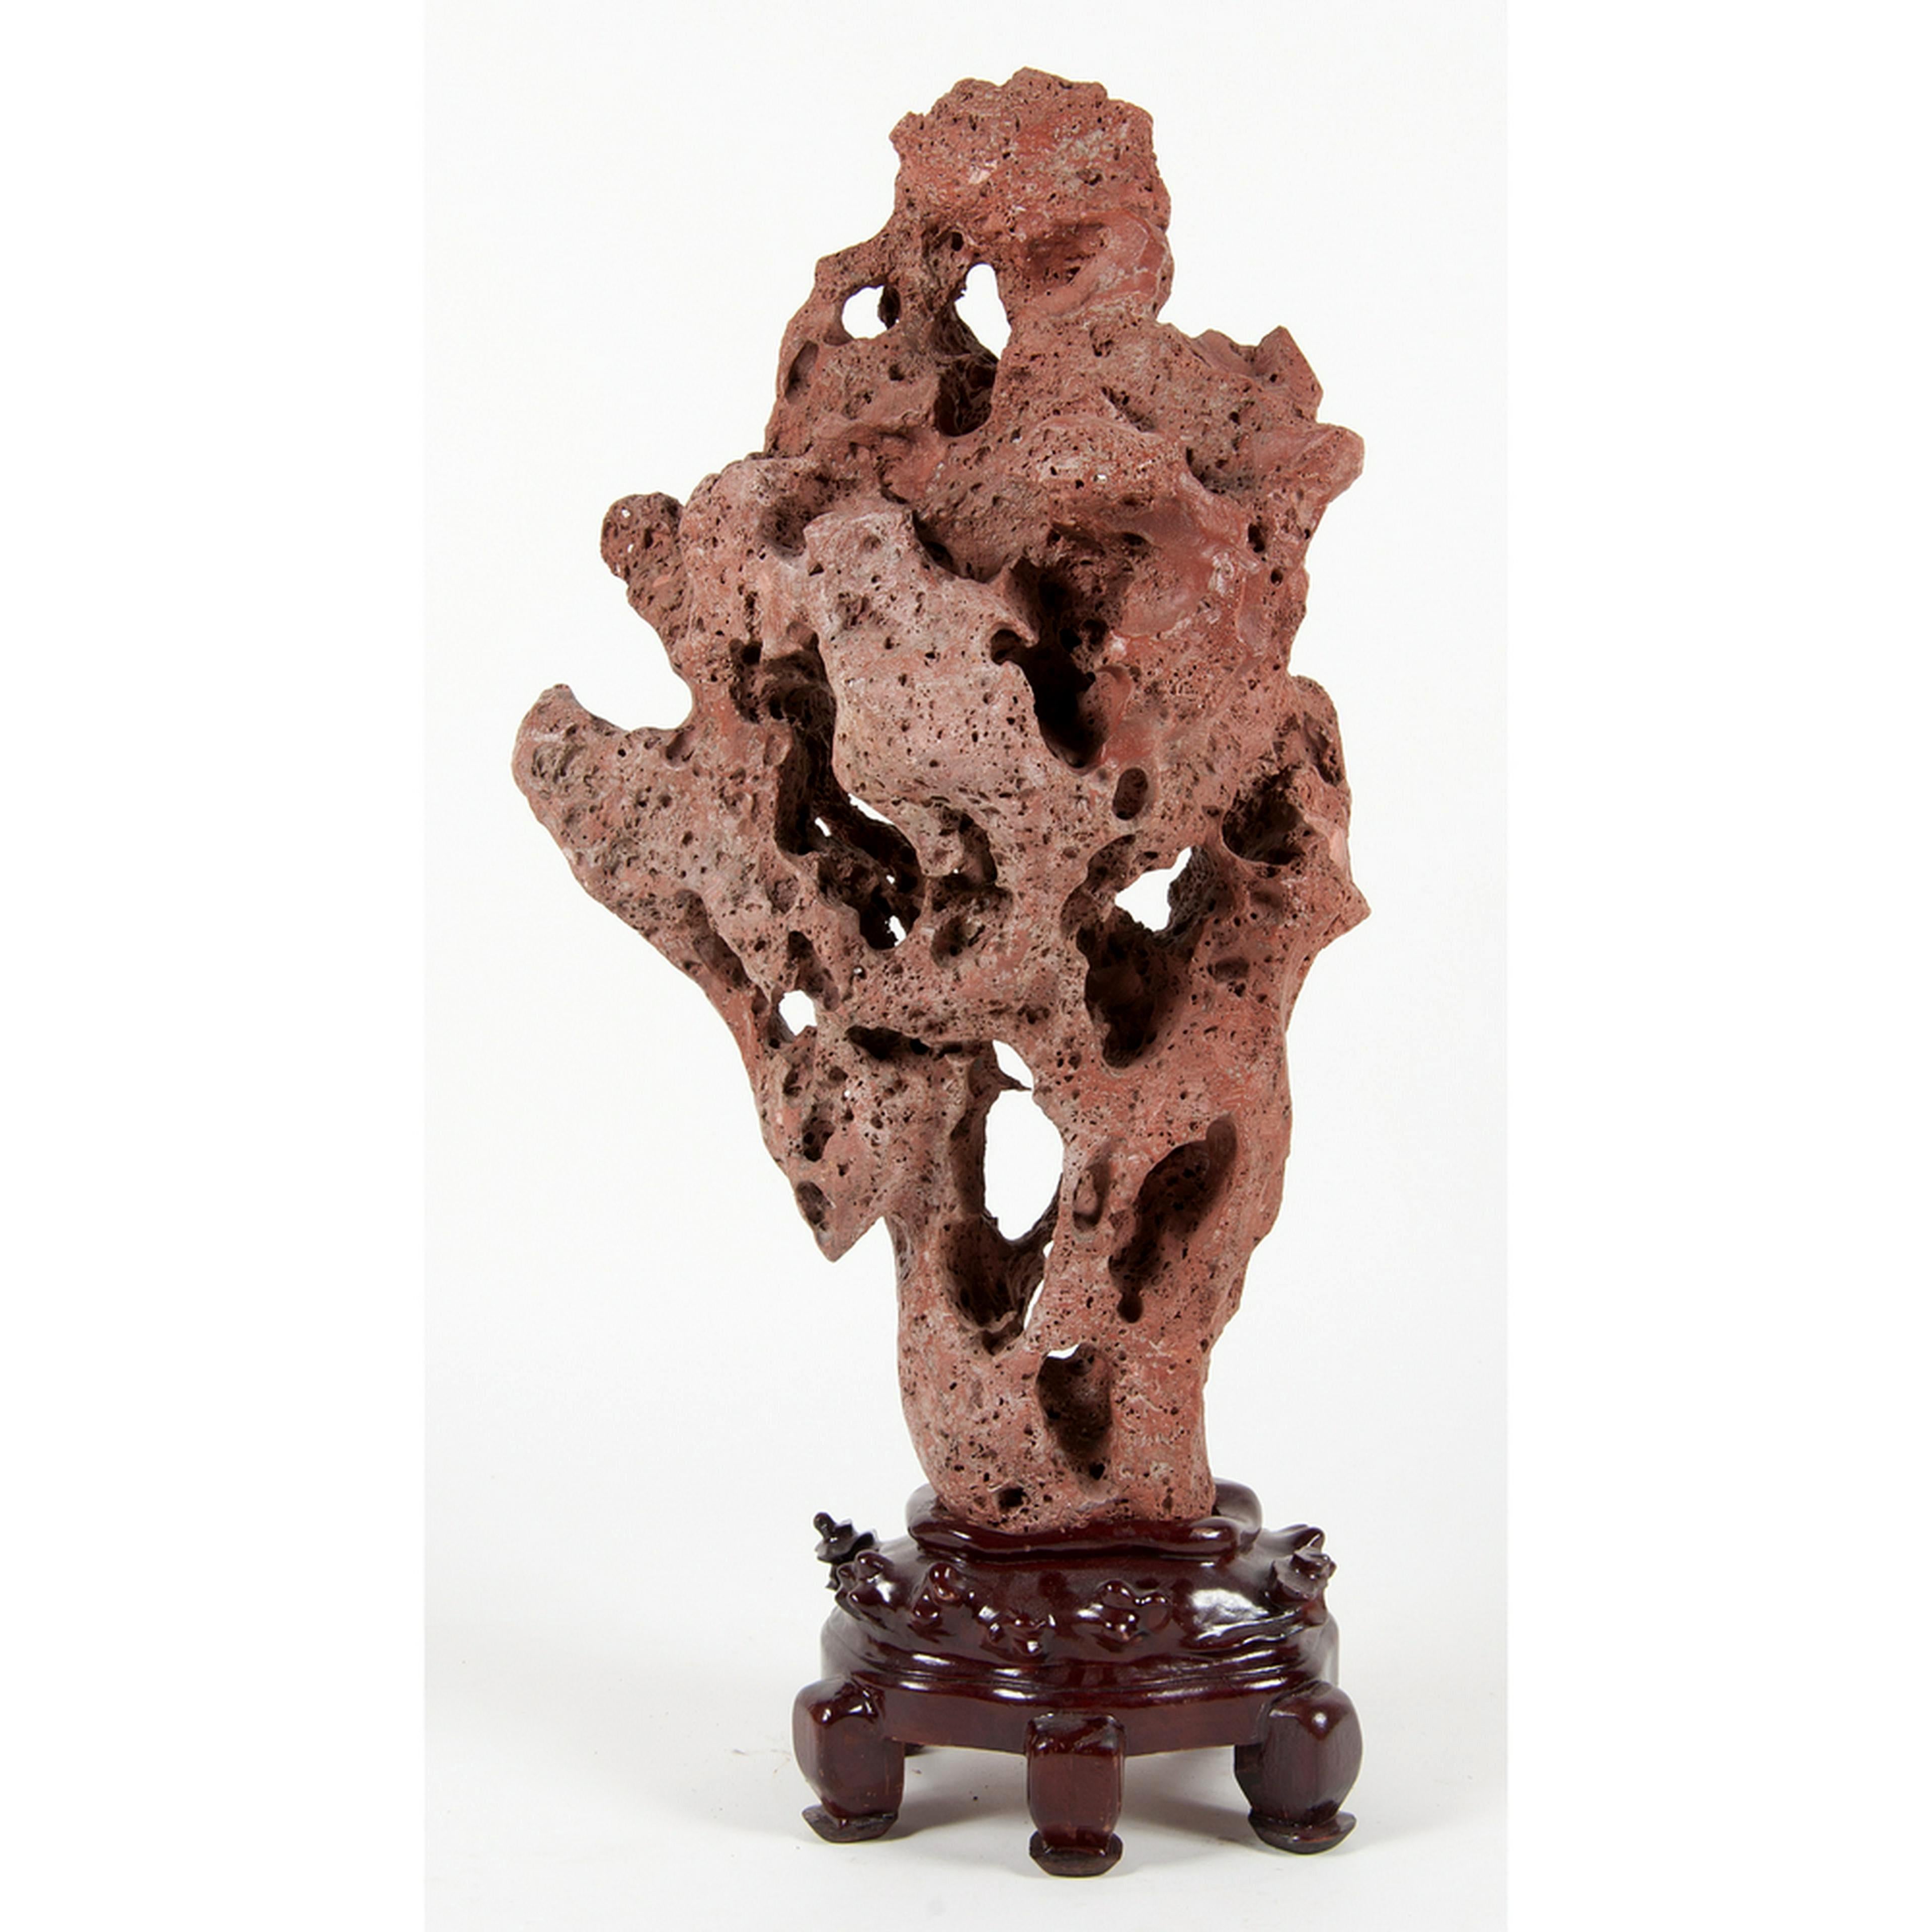 A large and dramatic Chinese Gongshi (known as meditation stone or spirit stone) from Taihu (Lake Tai) balanced on display stand. This scholar rock features a relatively red and porous surface. Its elegant mushroom cloud form resembles red coral in